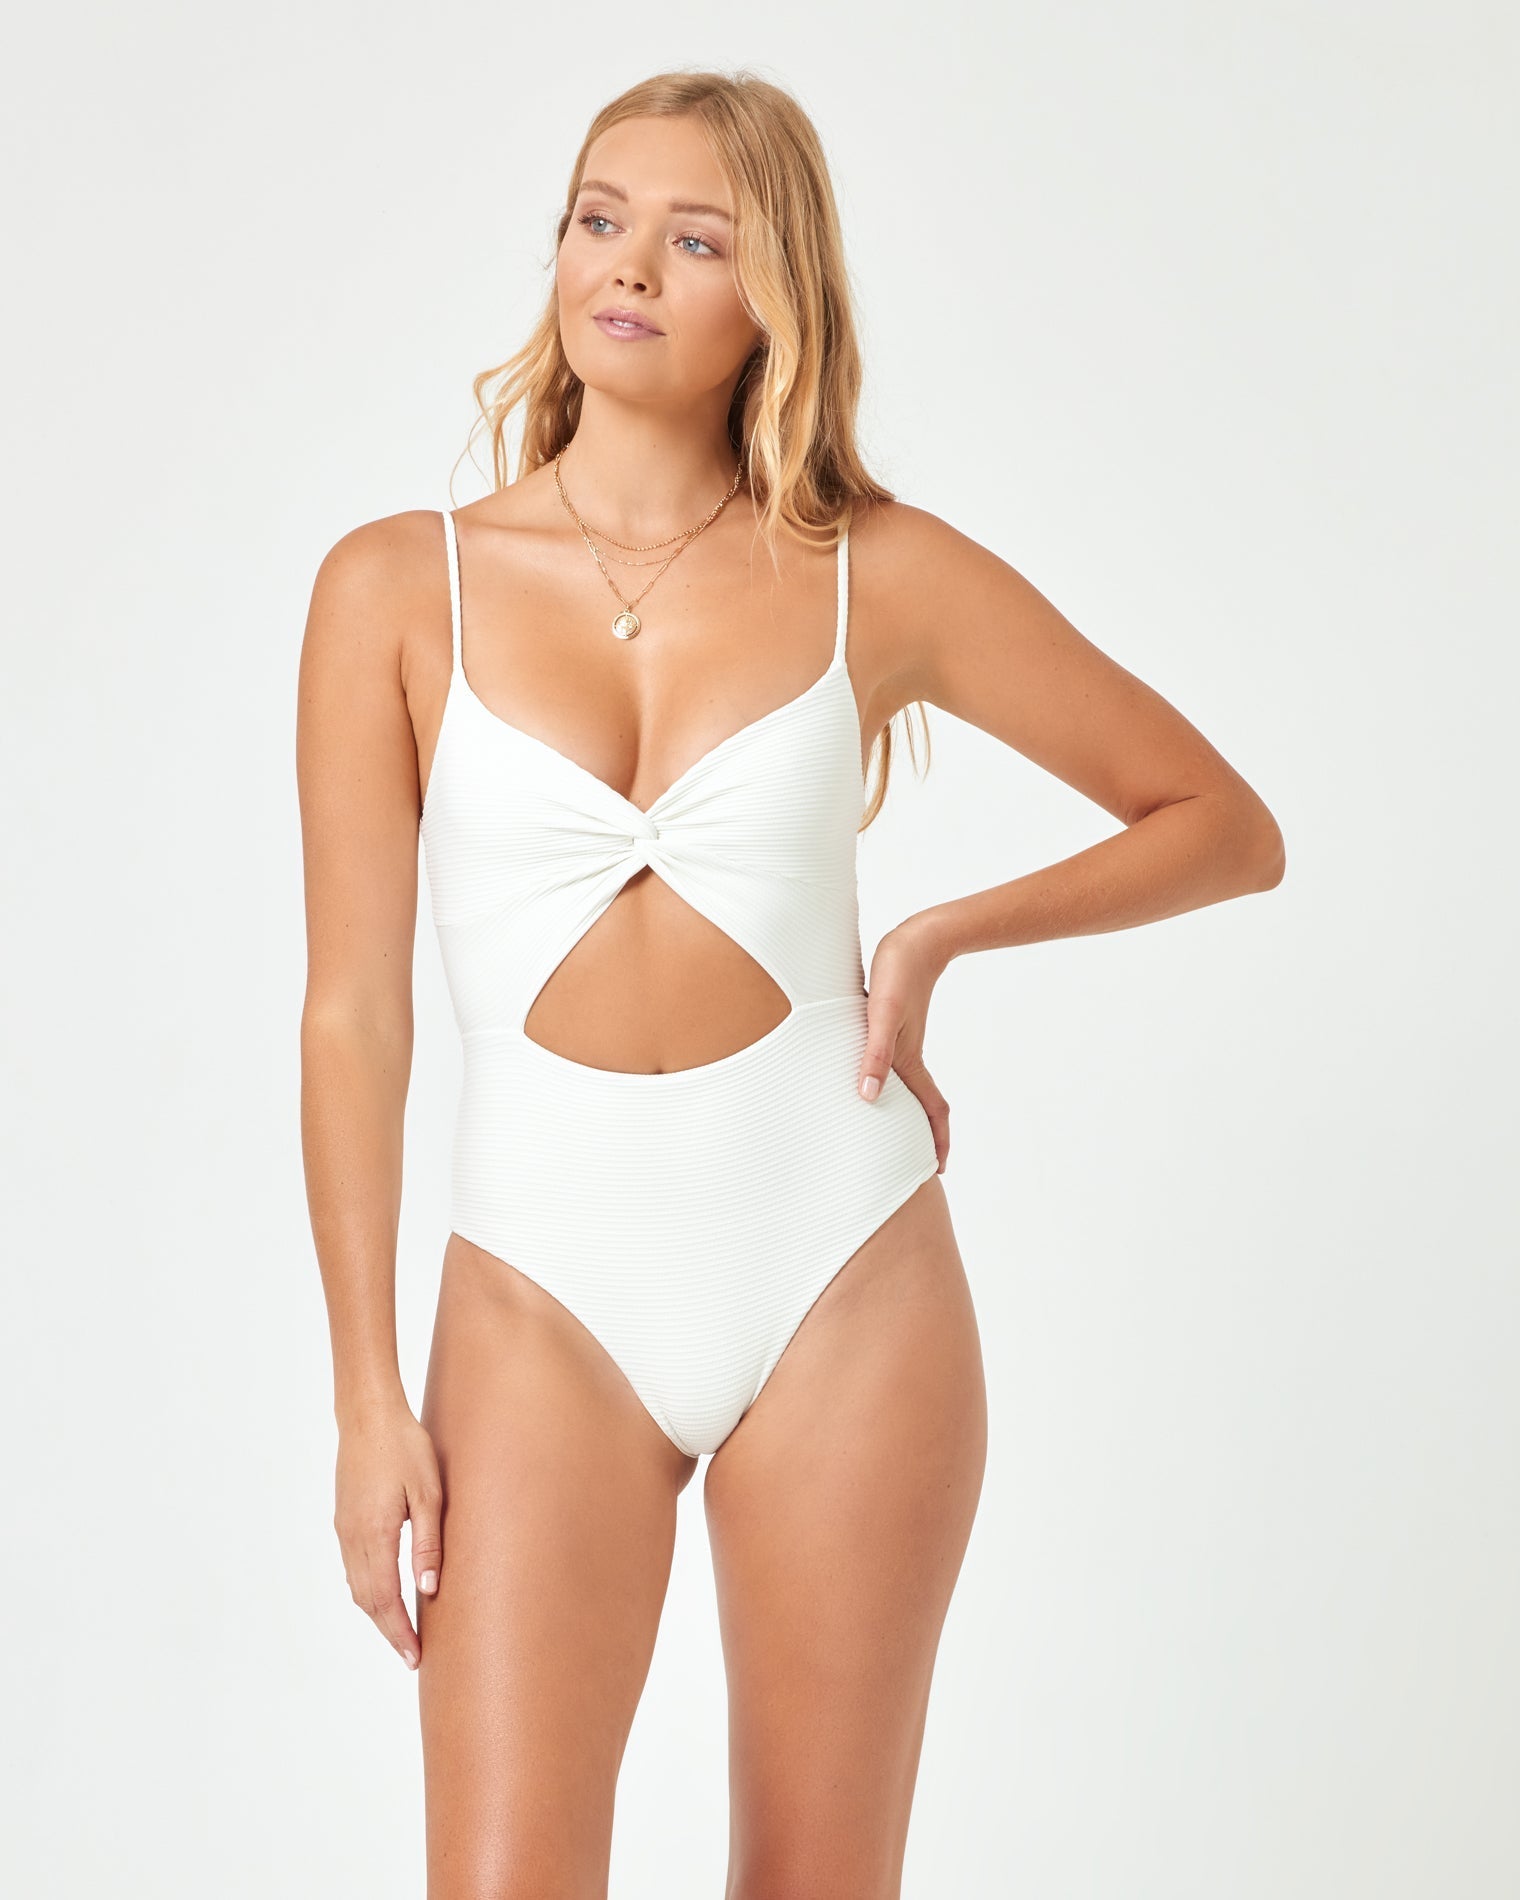 Eco Chic Repreve® Kyslee One Piece Swimsuit - Cream Cream | Model: Charlie (size: S) | Hover